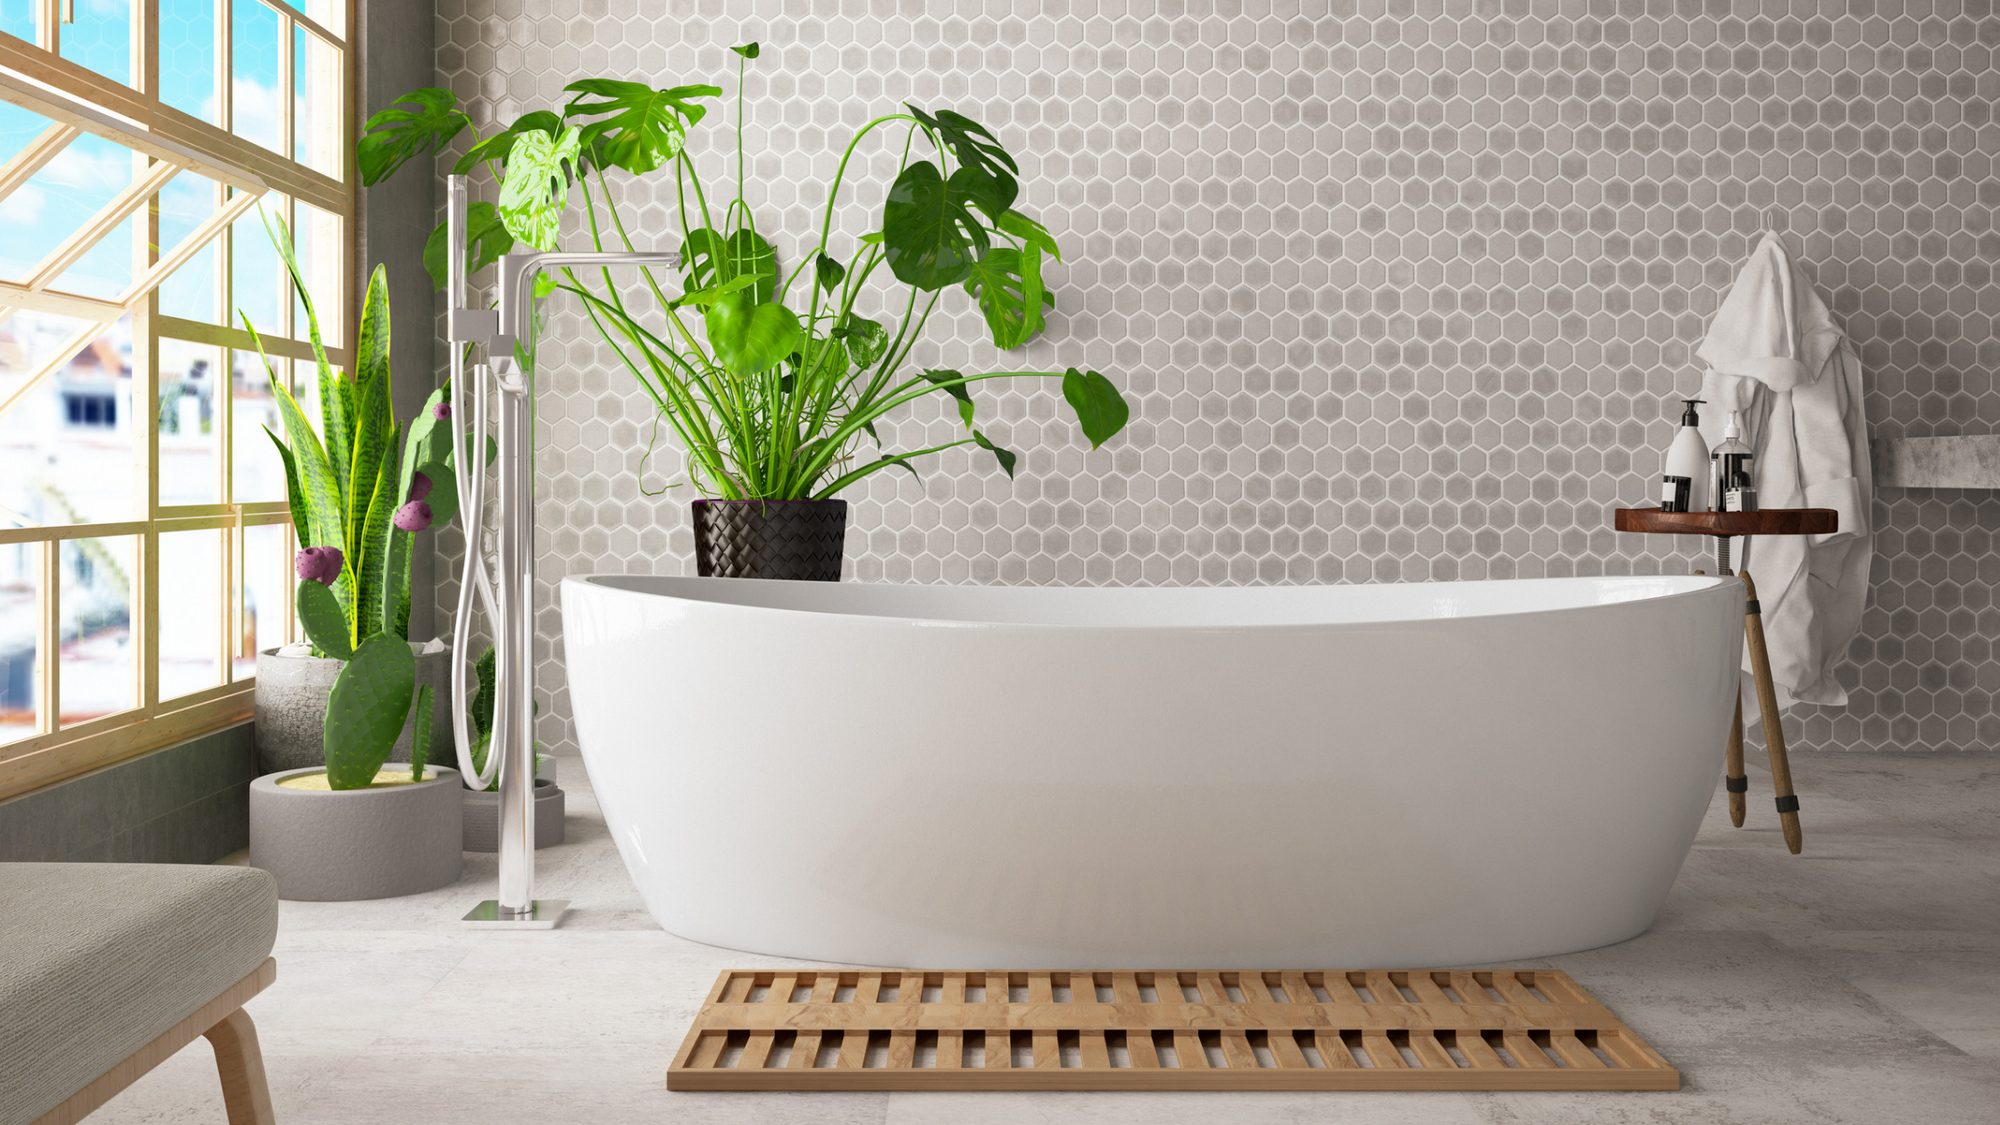 5 Bathroom Cleaning Hacks For a Quick Clean